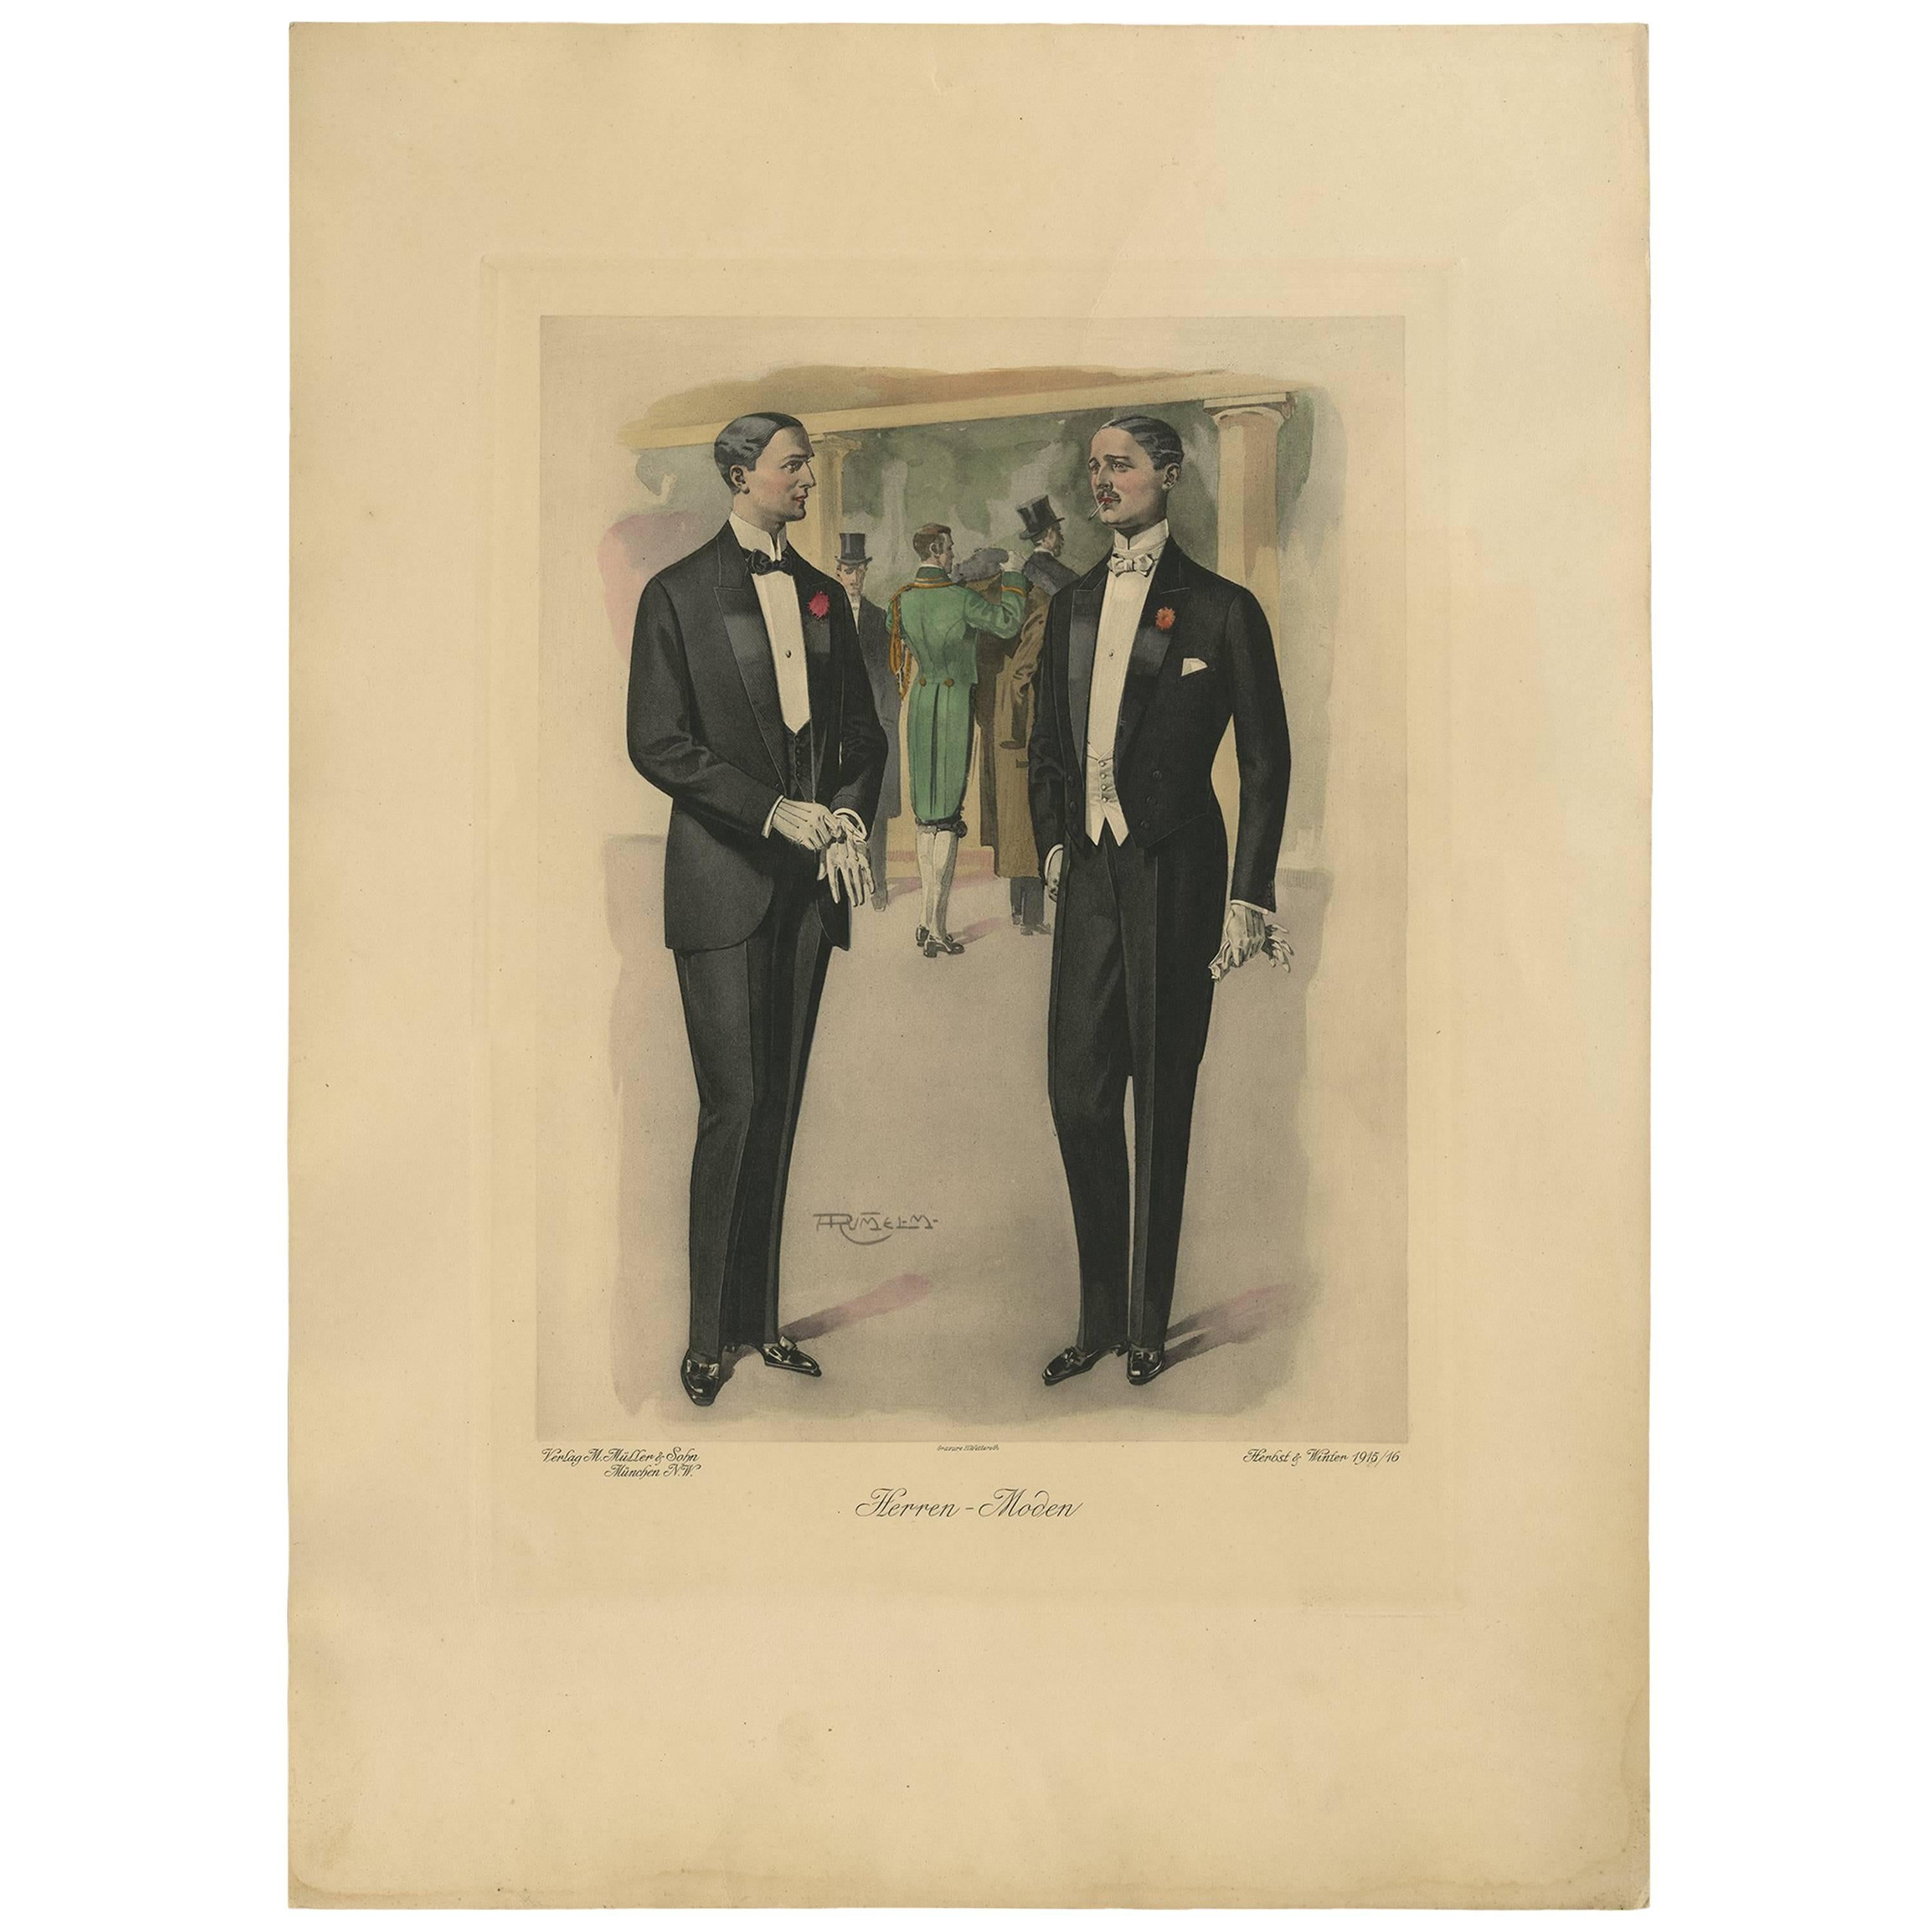 Antique Print of Men's Fashion by H. Wetteroth, circa 1915